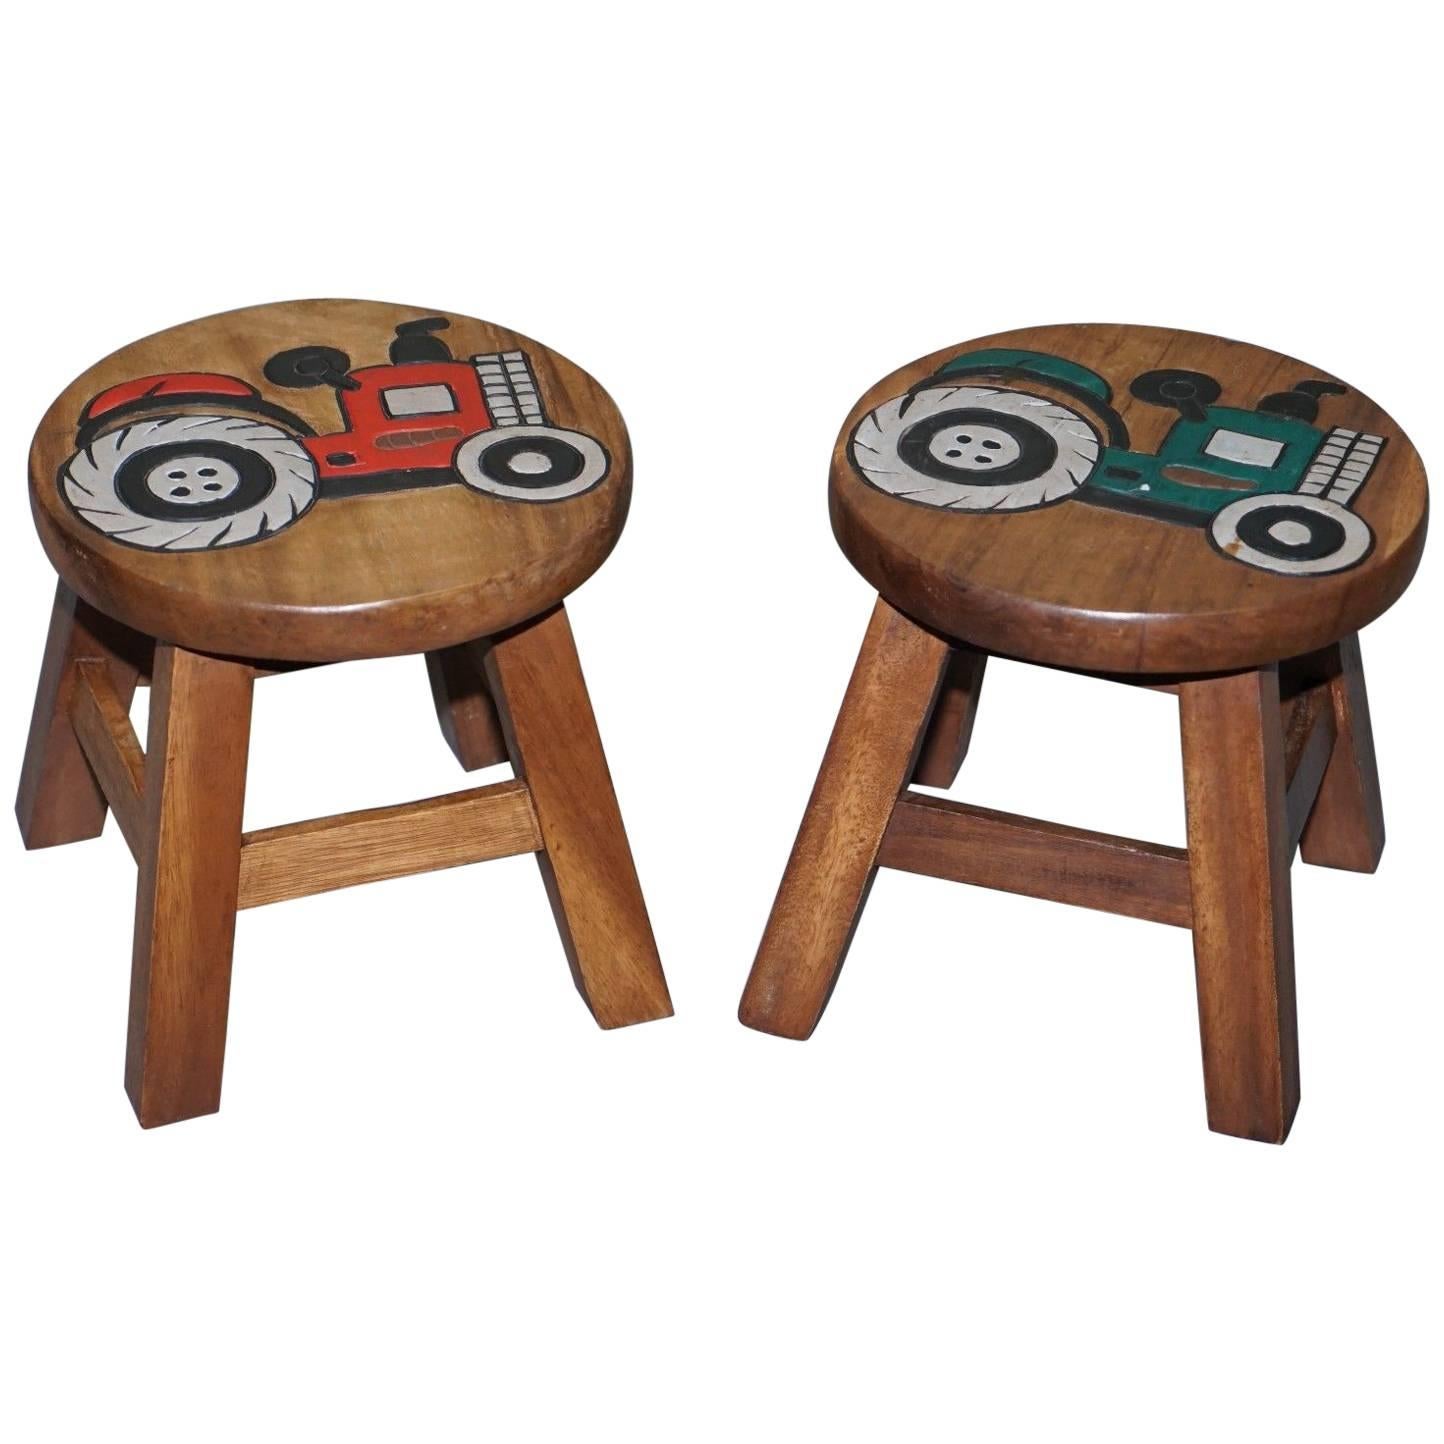 Lovely Pair of Toddlers Children's Solid Wood Stools with Little Tractors on